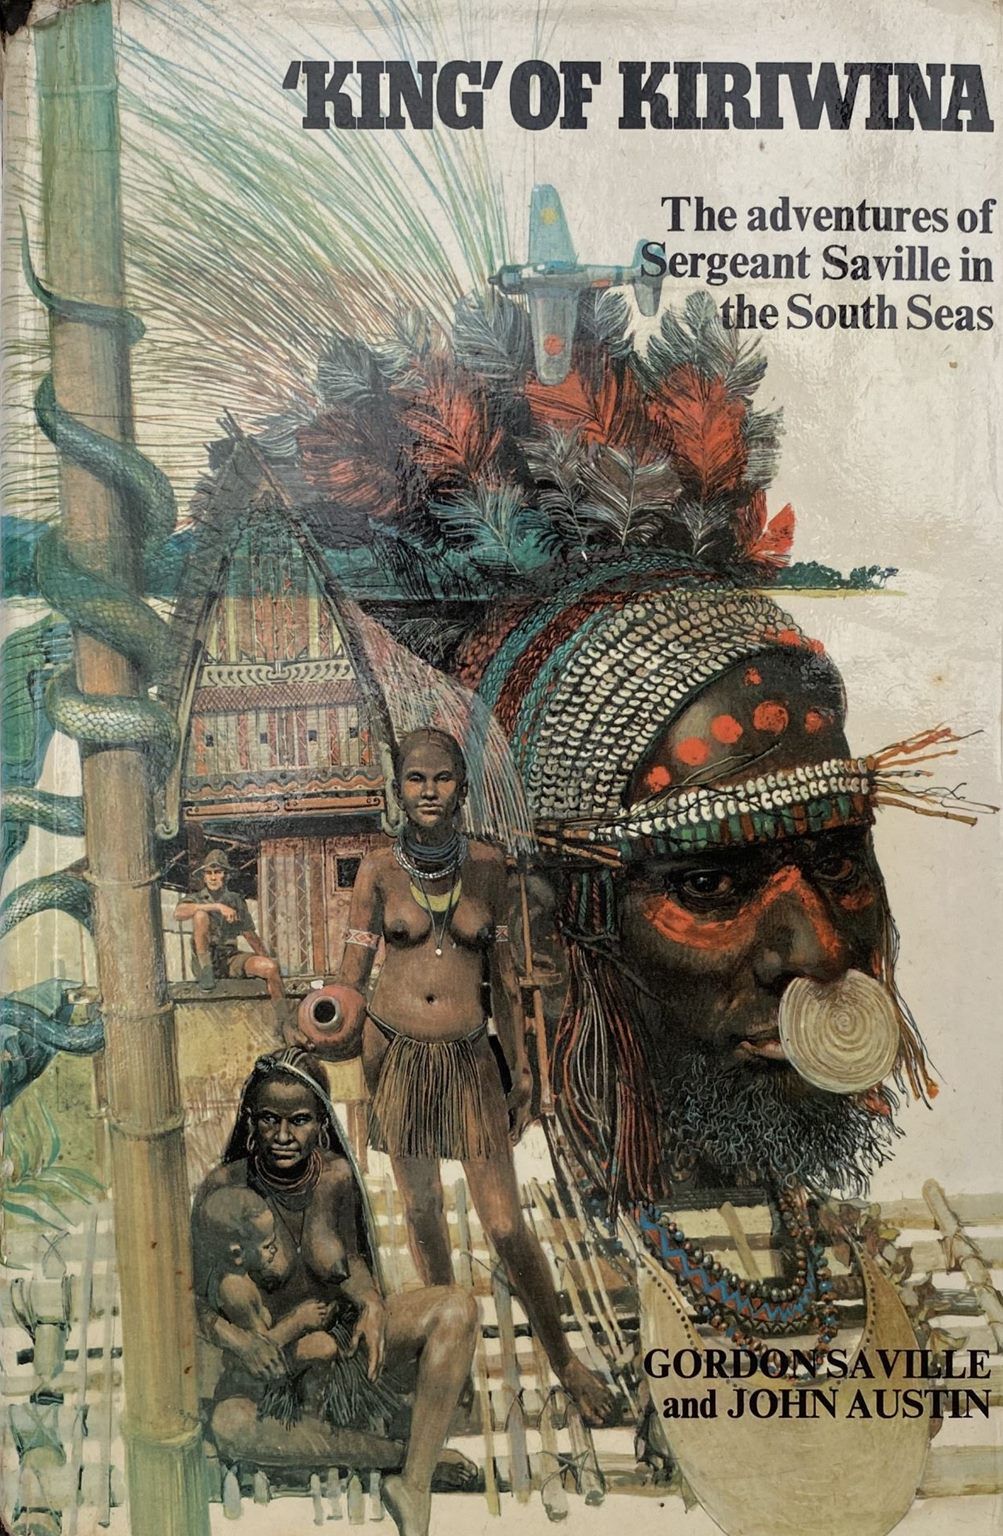 KING OF KIRIWINA: The Adventures Of Sergeant Saville In The South Seas